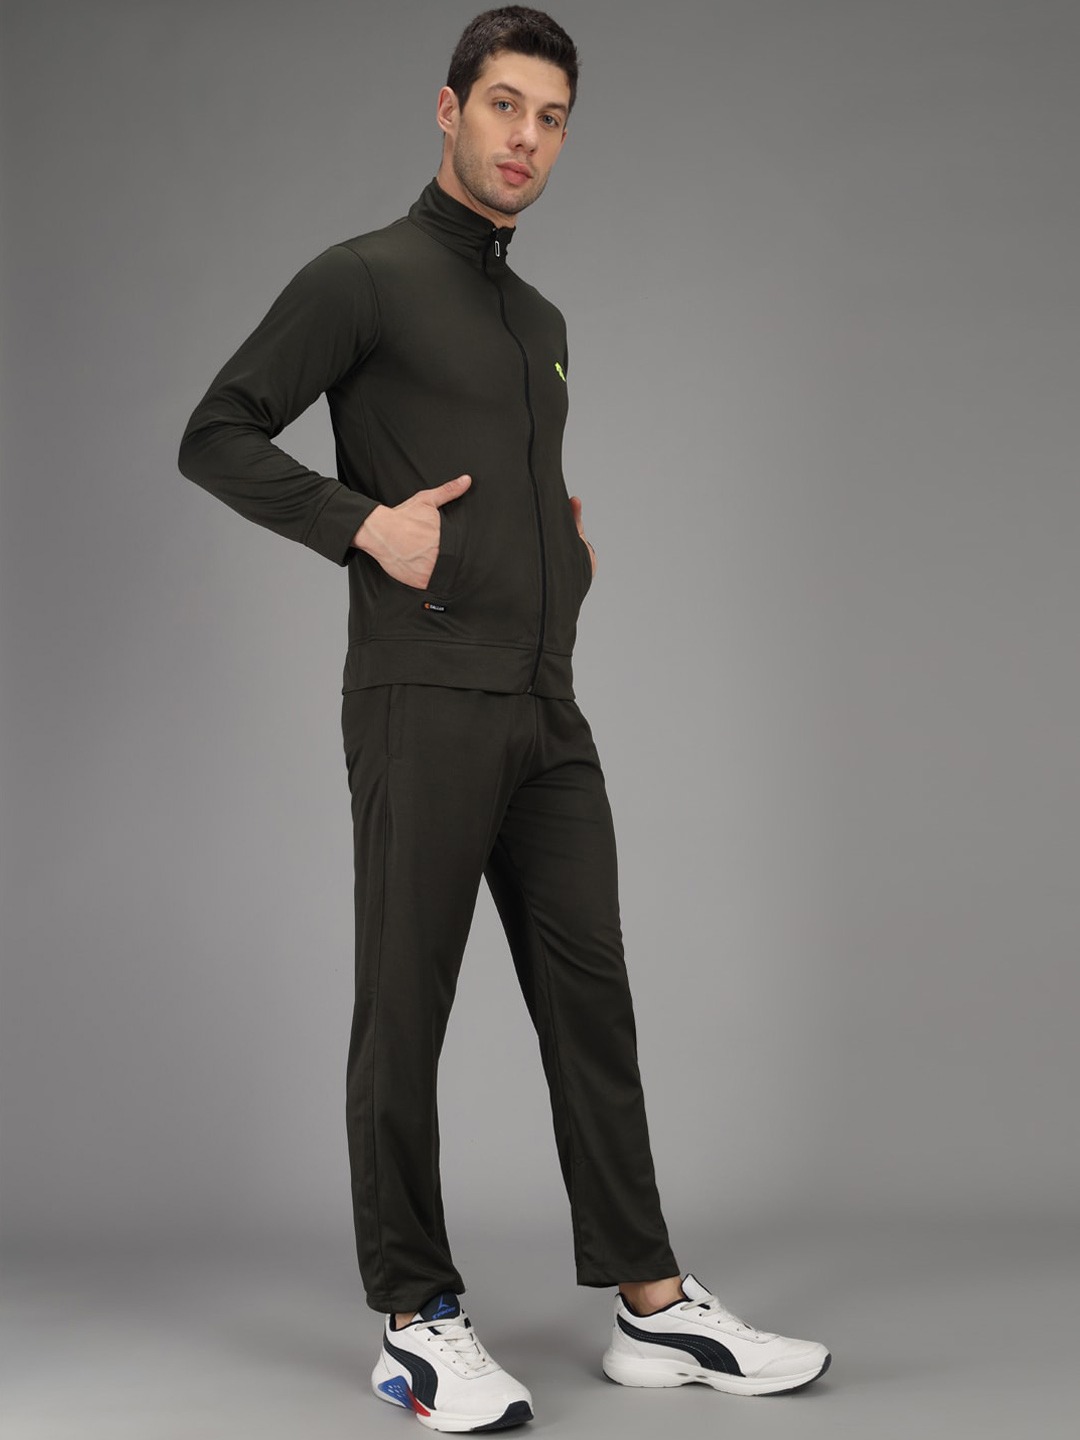 Clothing Tracksuits | Gallus Men Olive-Green Solid Tracksuit - TQ23518